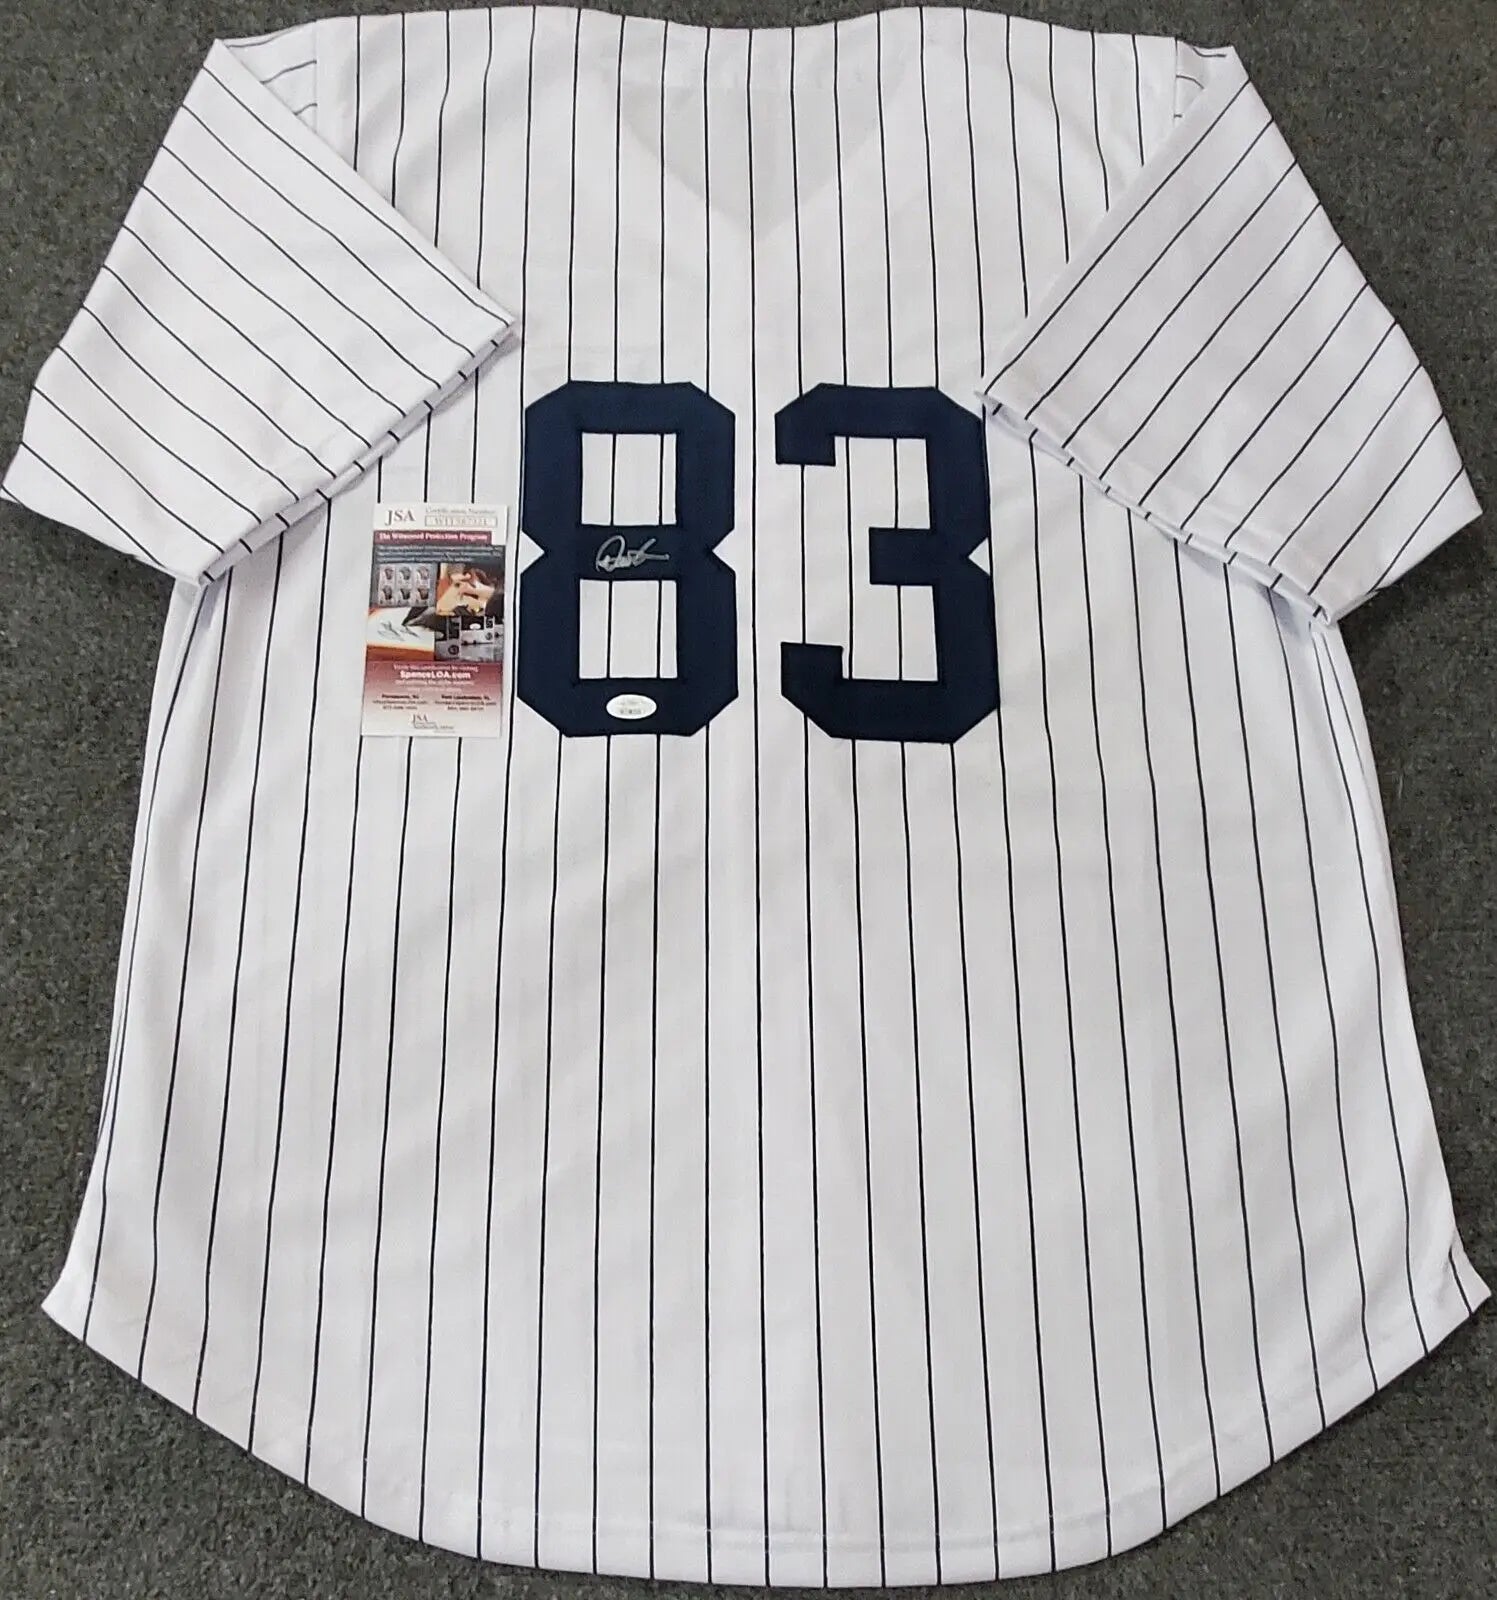 yankees jersey style